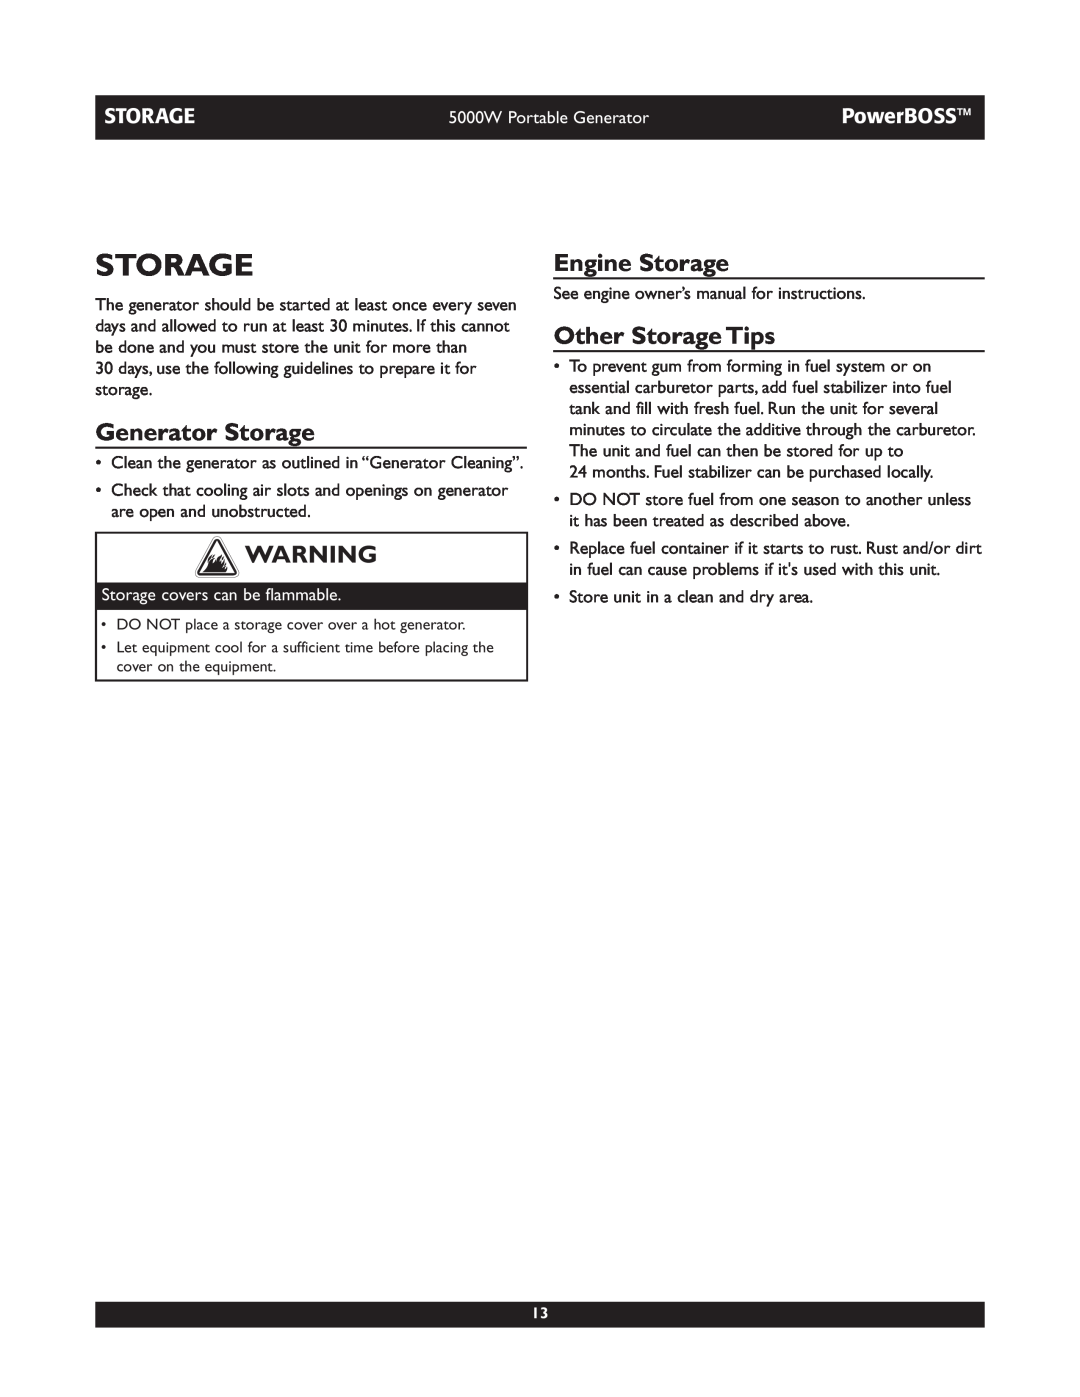 Briggs & Stratton 030222 Generator Storage, Engine Storage, Other Storage Tips, Storage covers can be flammable 